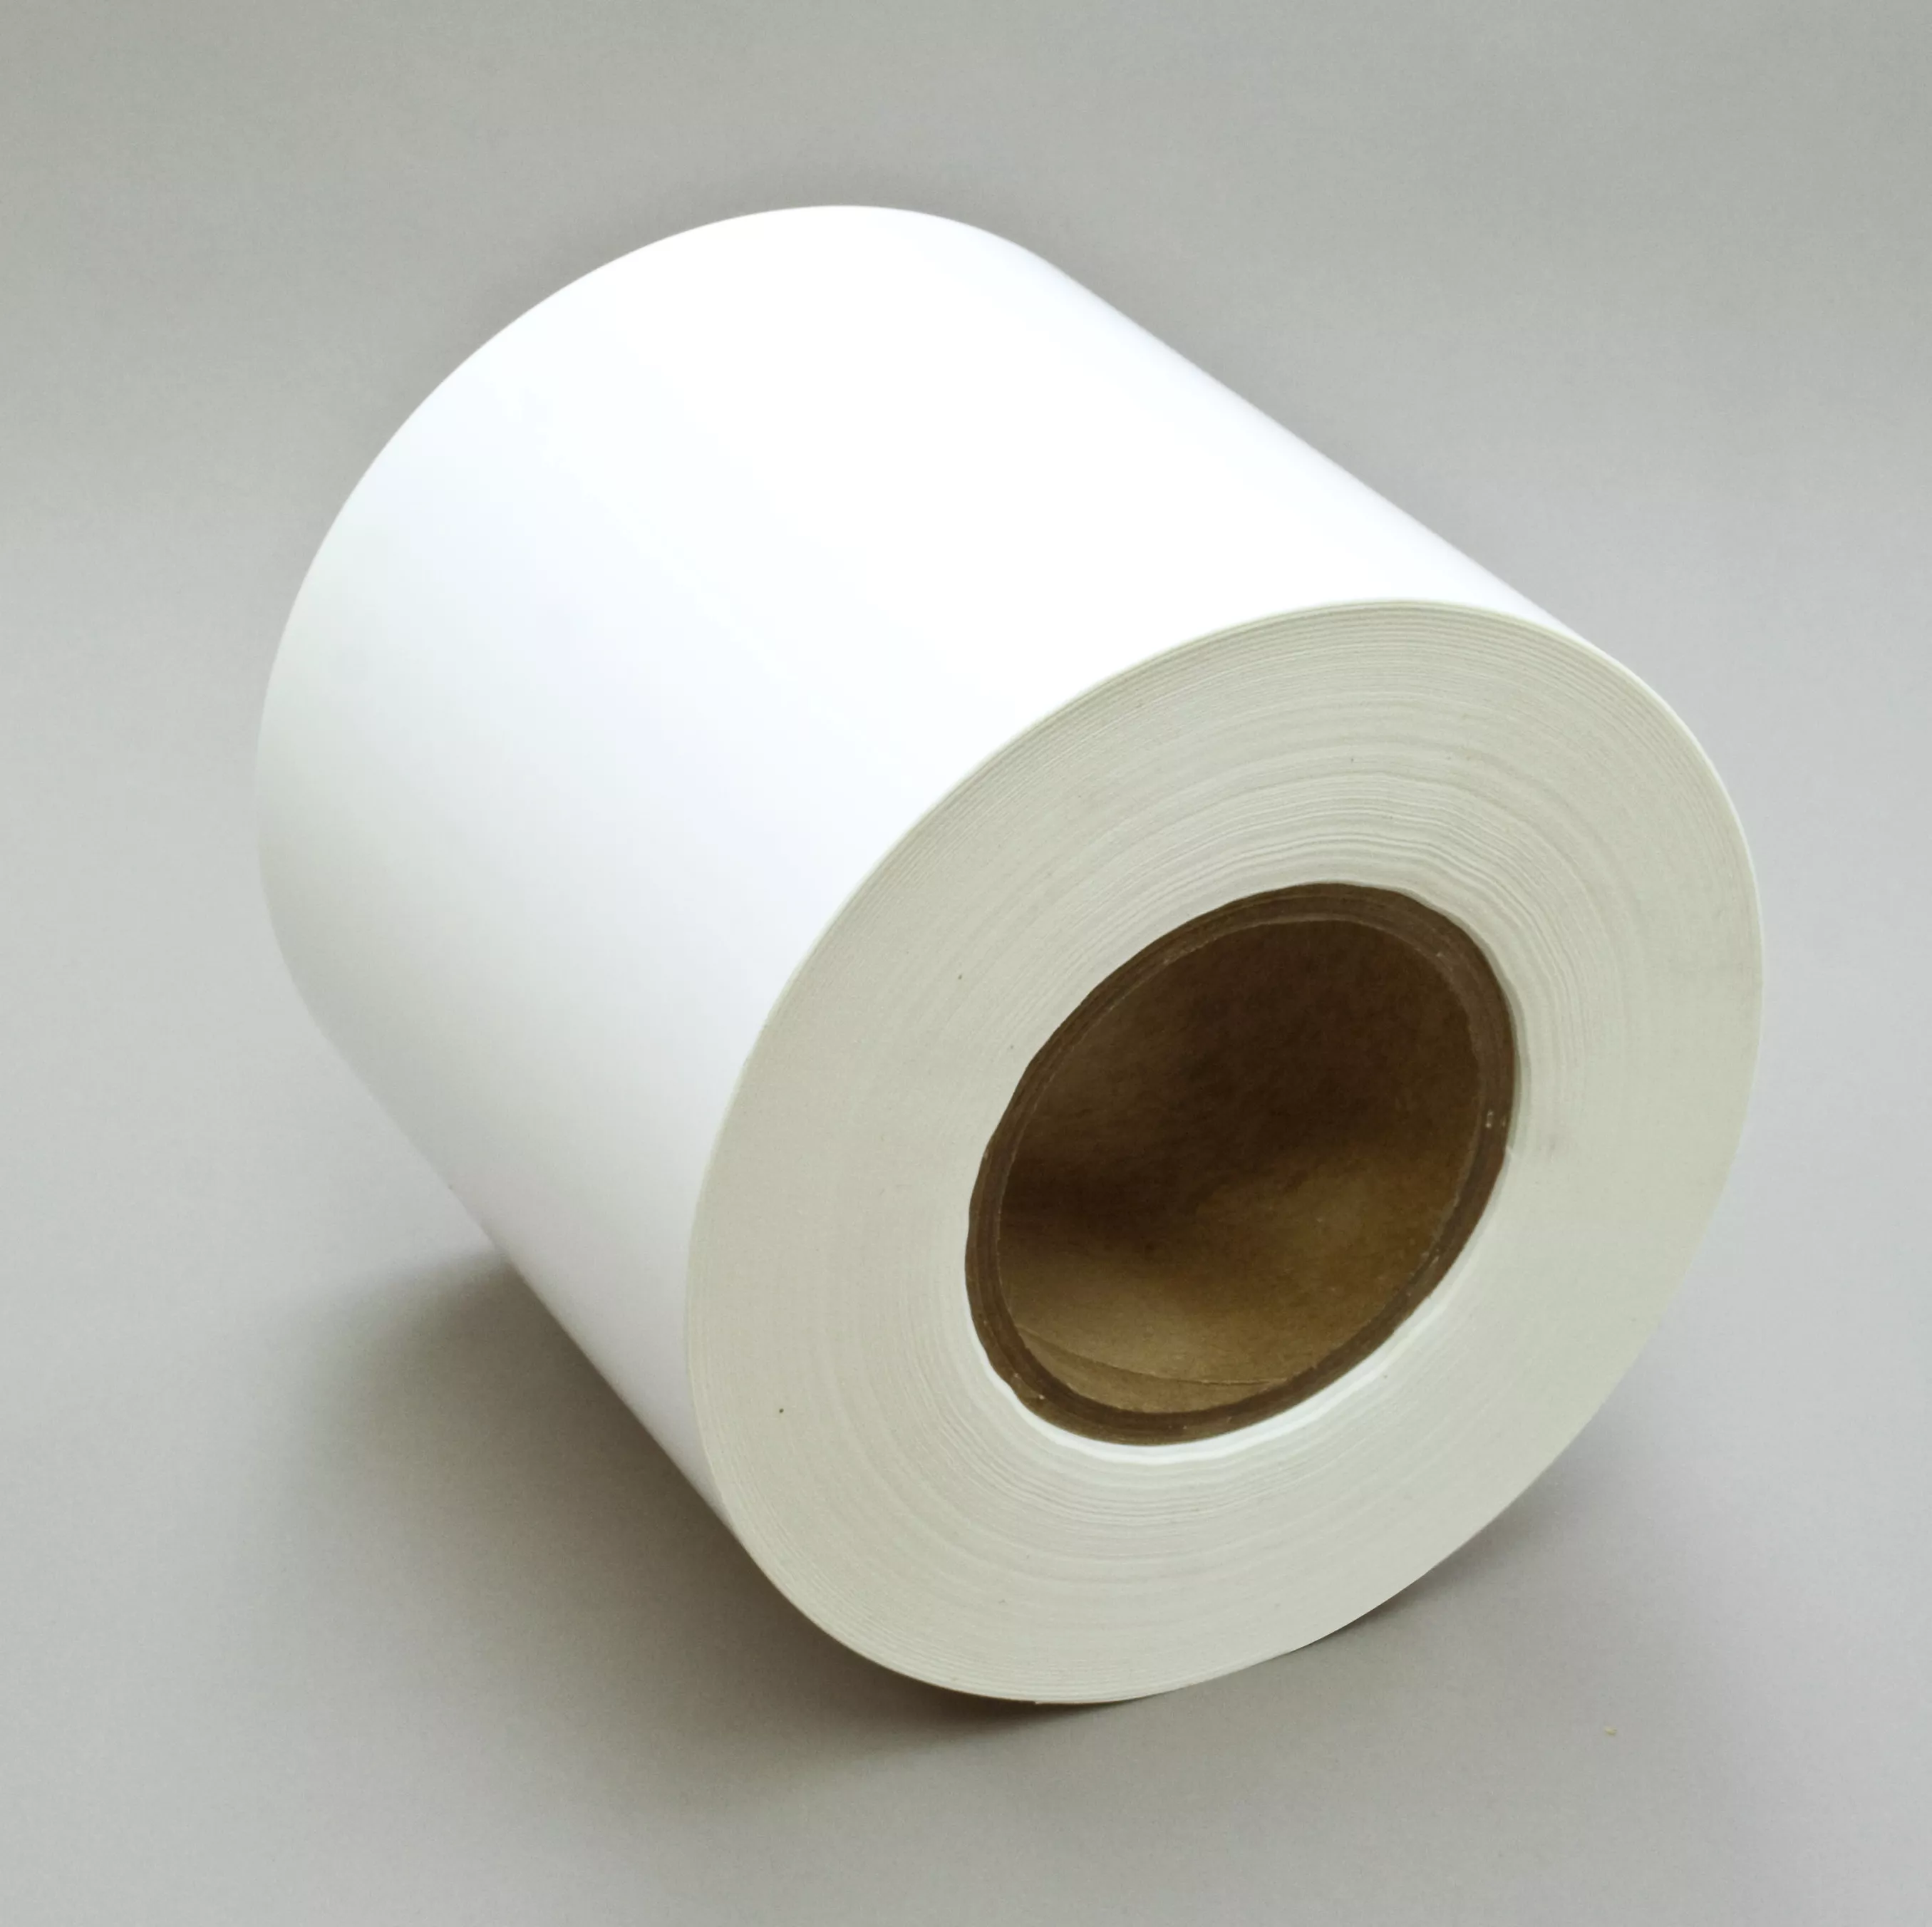 3M™ Sheet and Screen Label Material 7980, Radiant White, 508 mm x 686 mm, 100 Sheets/ase